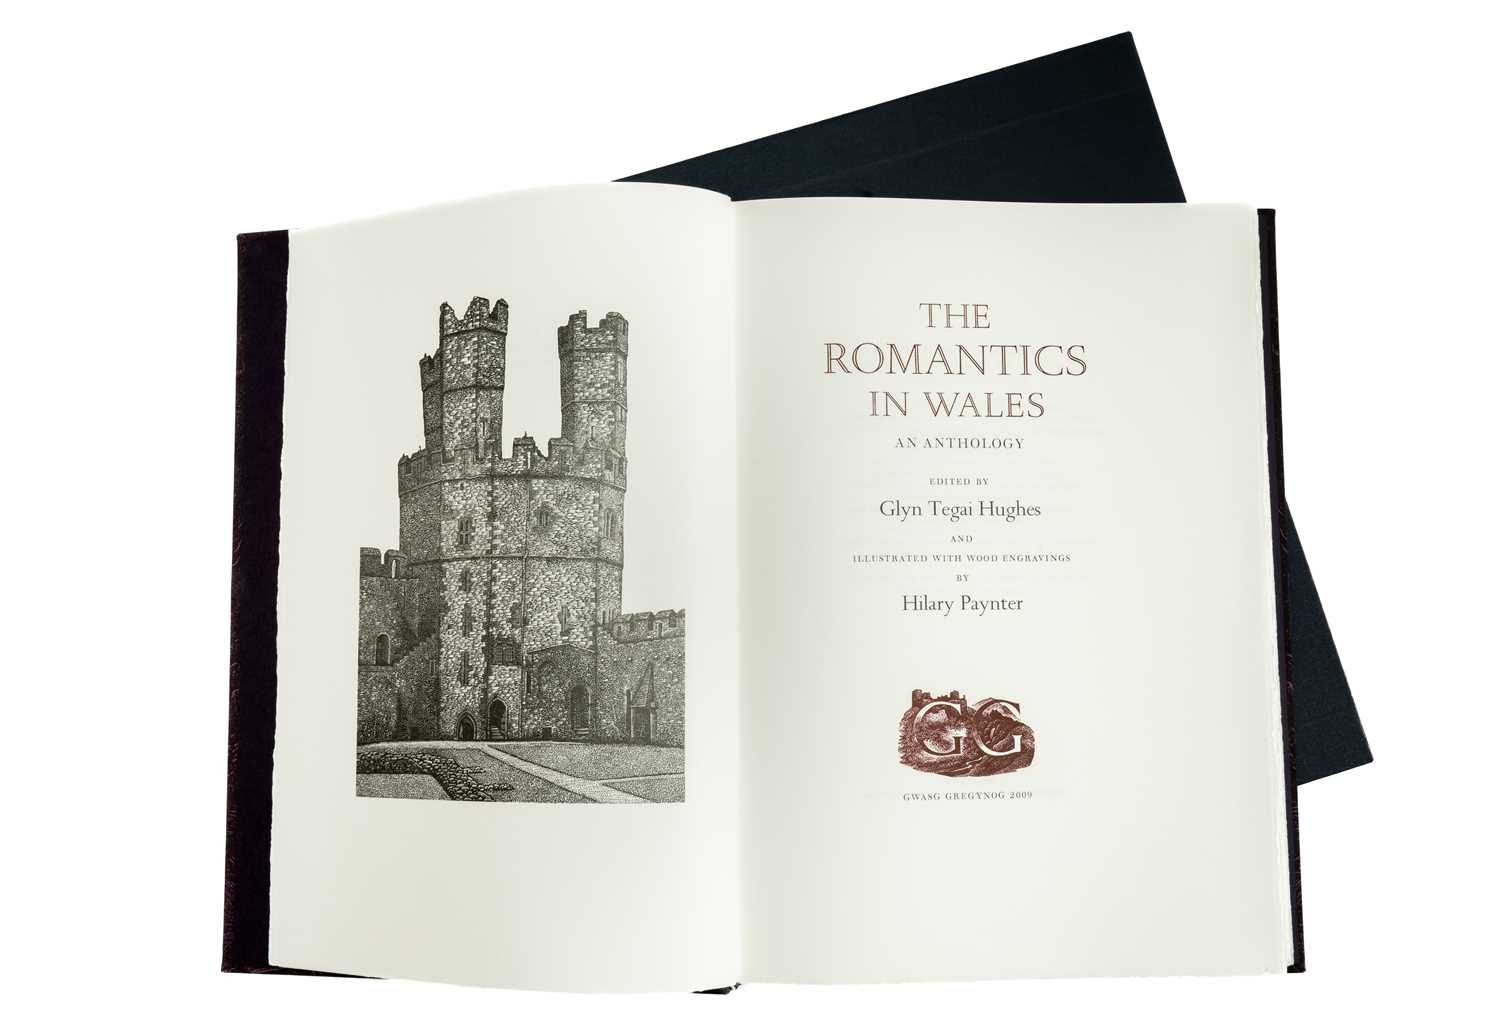 GWASG GREGYNOG PRESS: THE ROMANTICS IN WALES AN ANTHOLOGY 2009 limited edition (9/150) in quarter